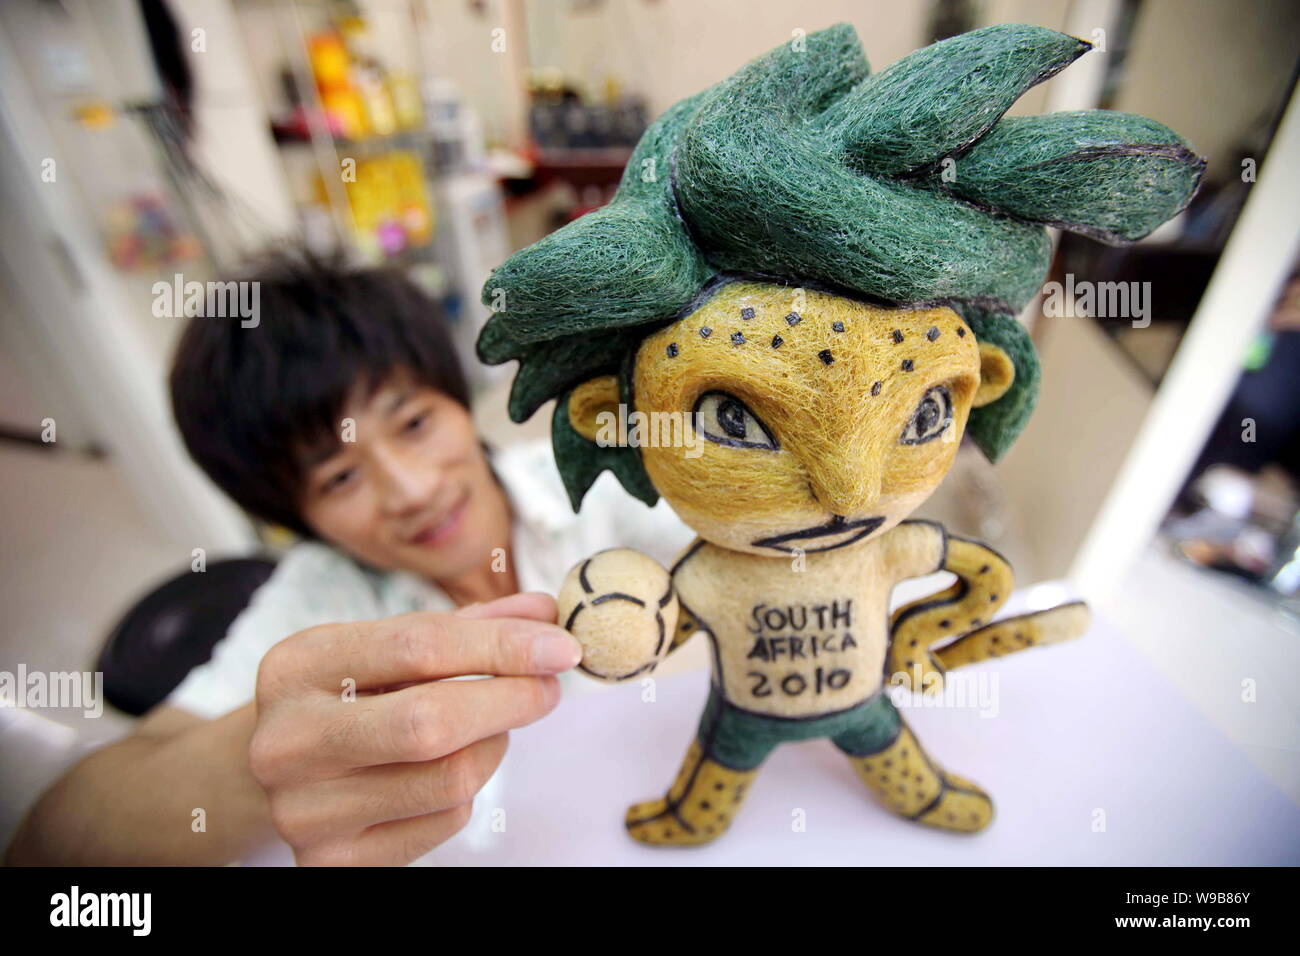 Chinese hairstylist Huang Xin puts final touches on his hair-made Zakumi, the official mascot of the World Cup South Africa 2010, in a hair salon in B Stock Photo